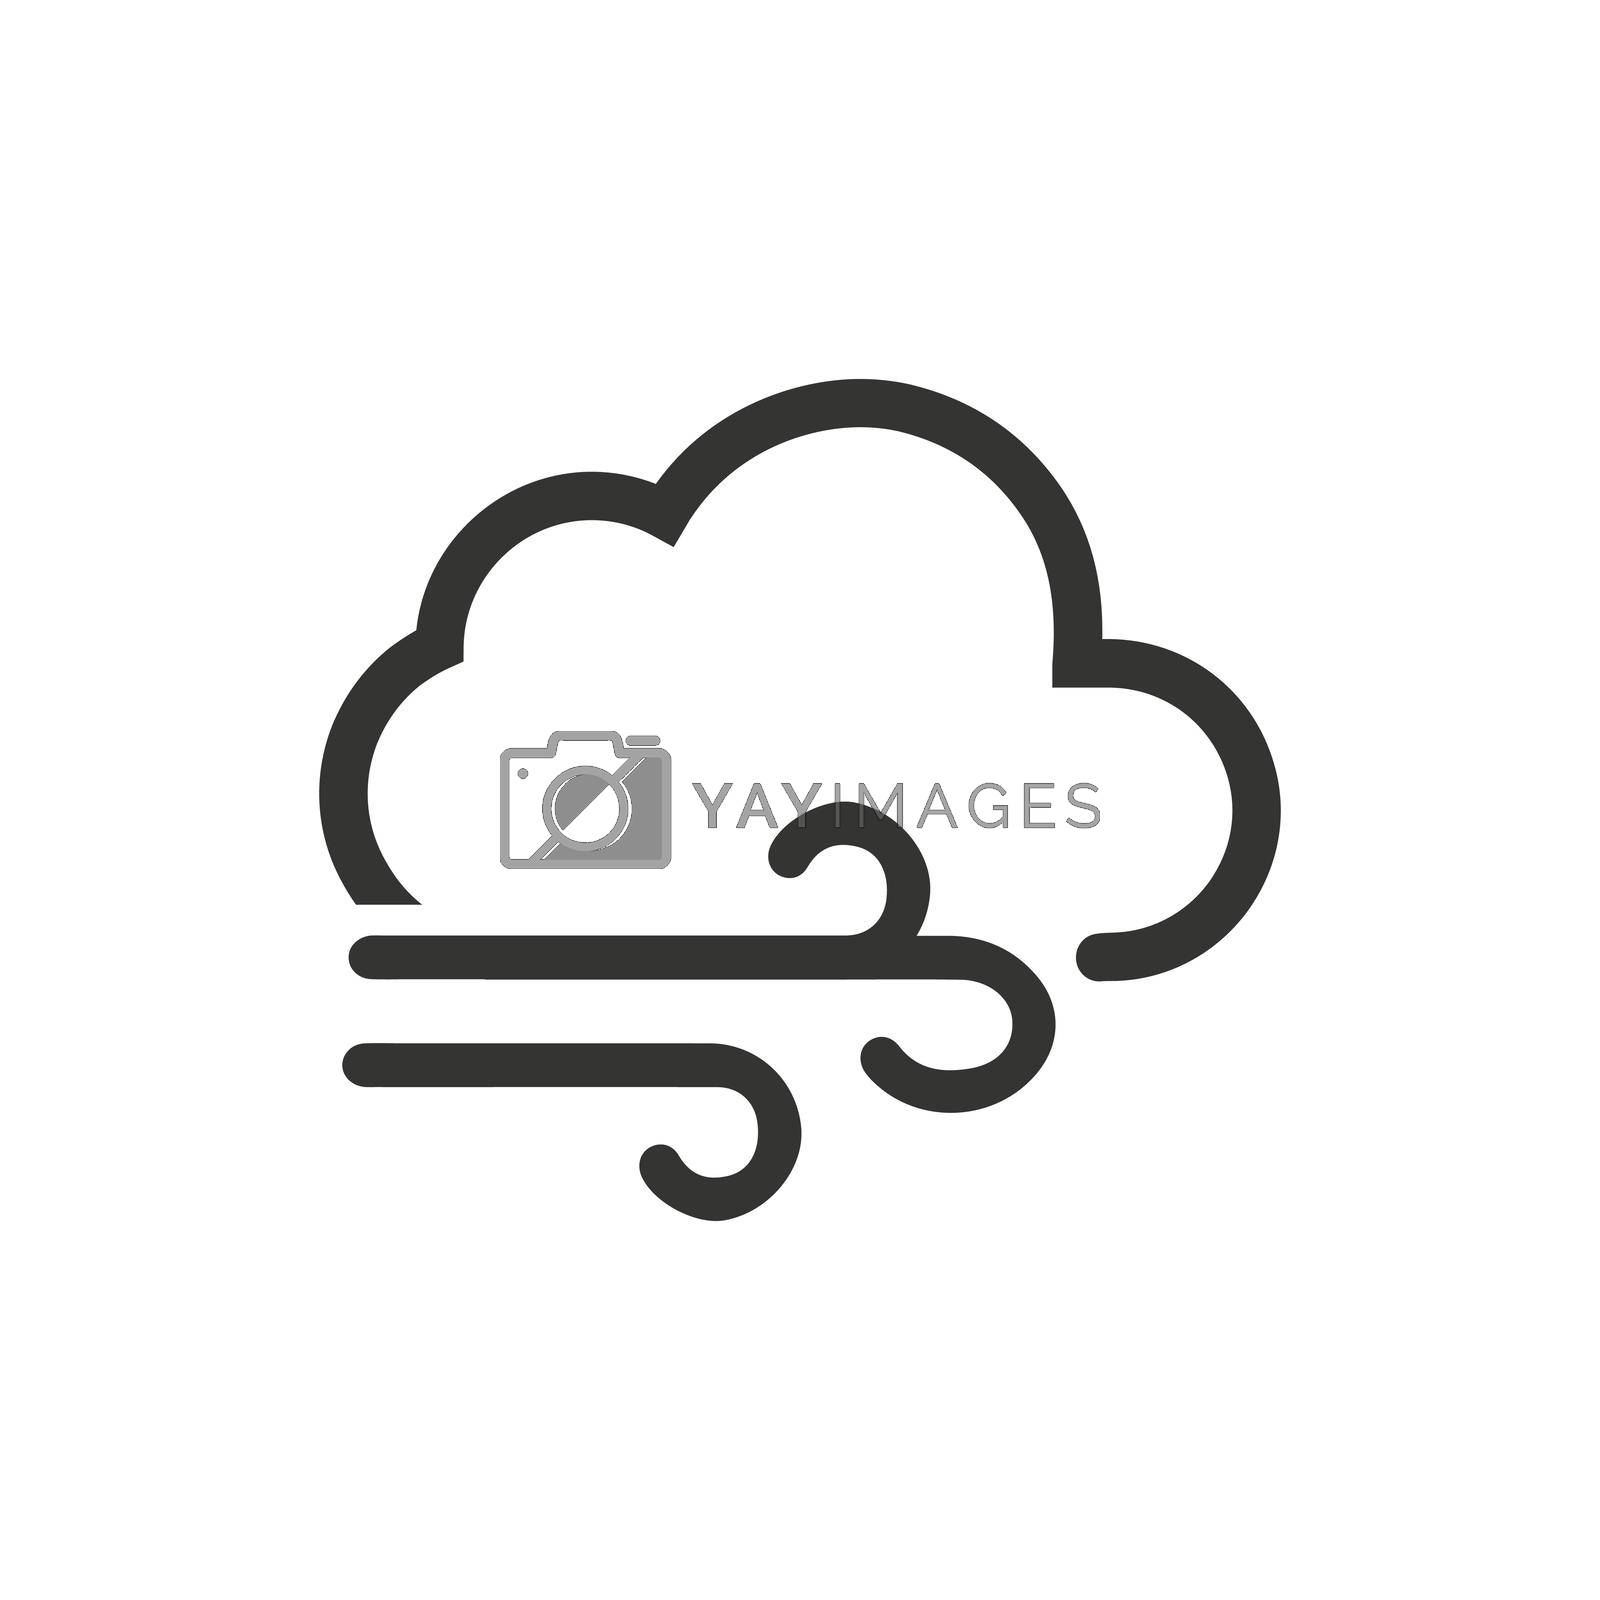 Cloudy Weather icon. Vector EPS file.